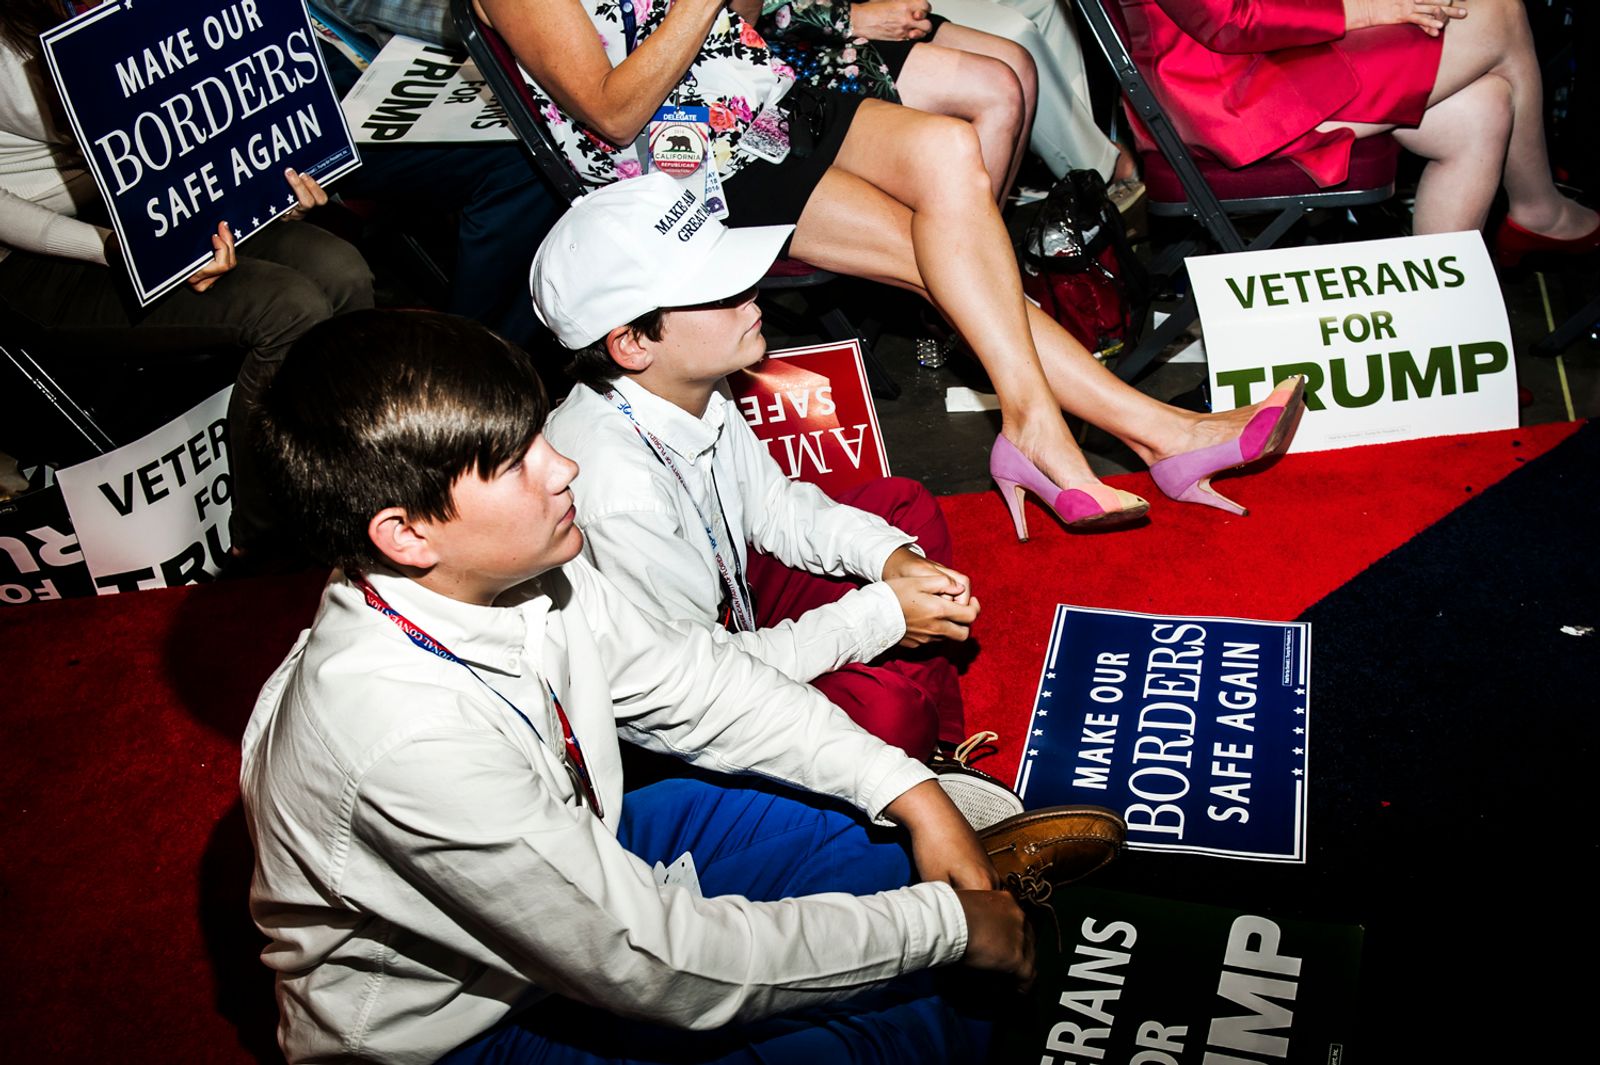 © Dina Litovsky - Image from the Republican National Convention photography project